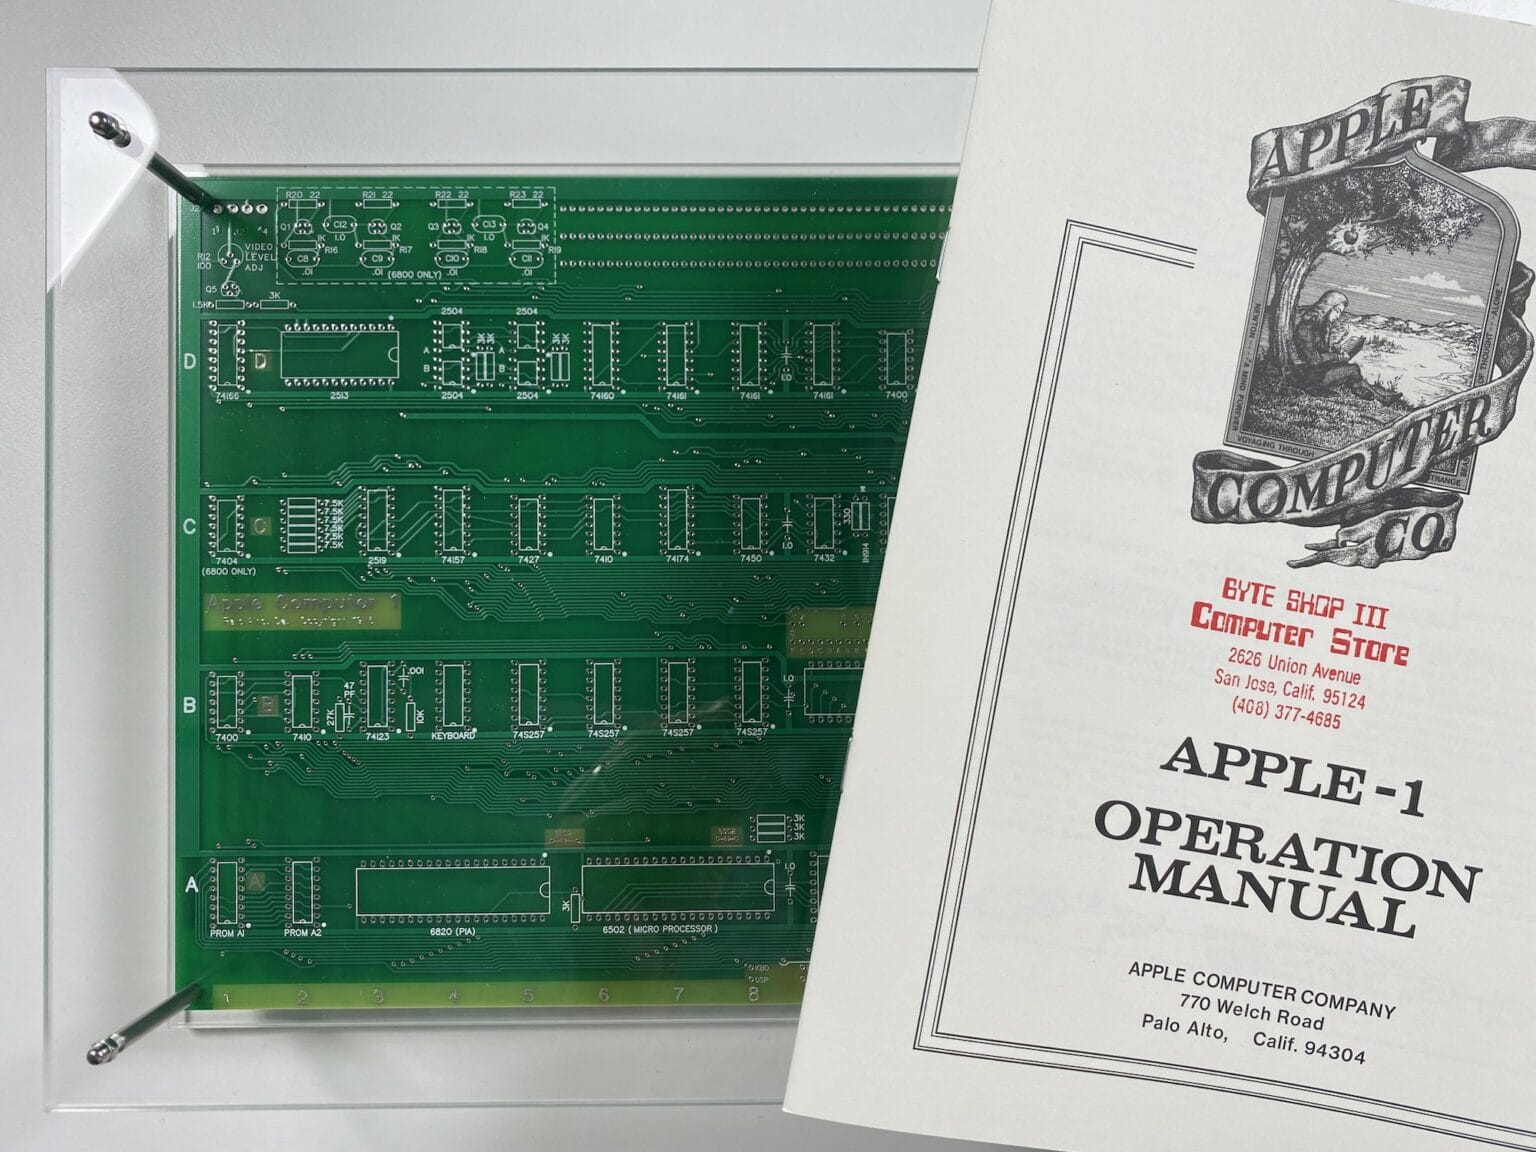 Did you know you can purchase a perfect recreation of the Apple-1 Operation Manual, along with a custom-made case to display it in?